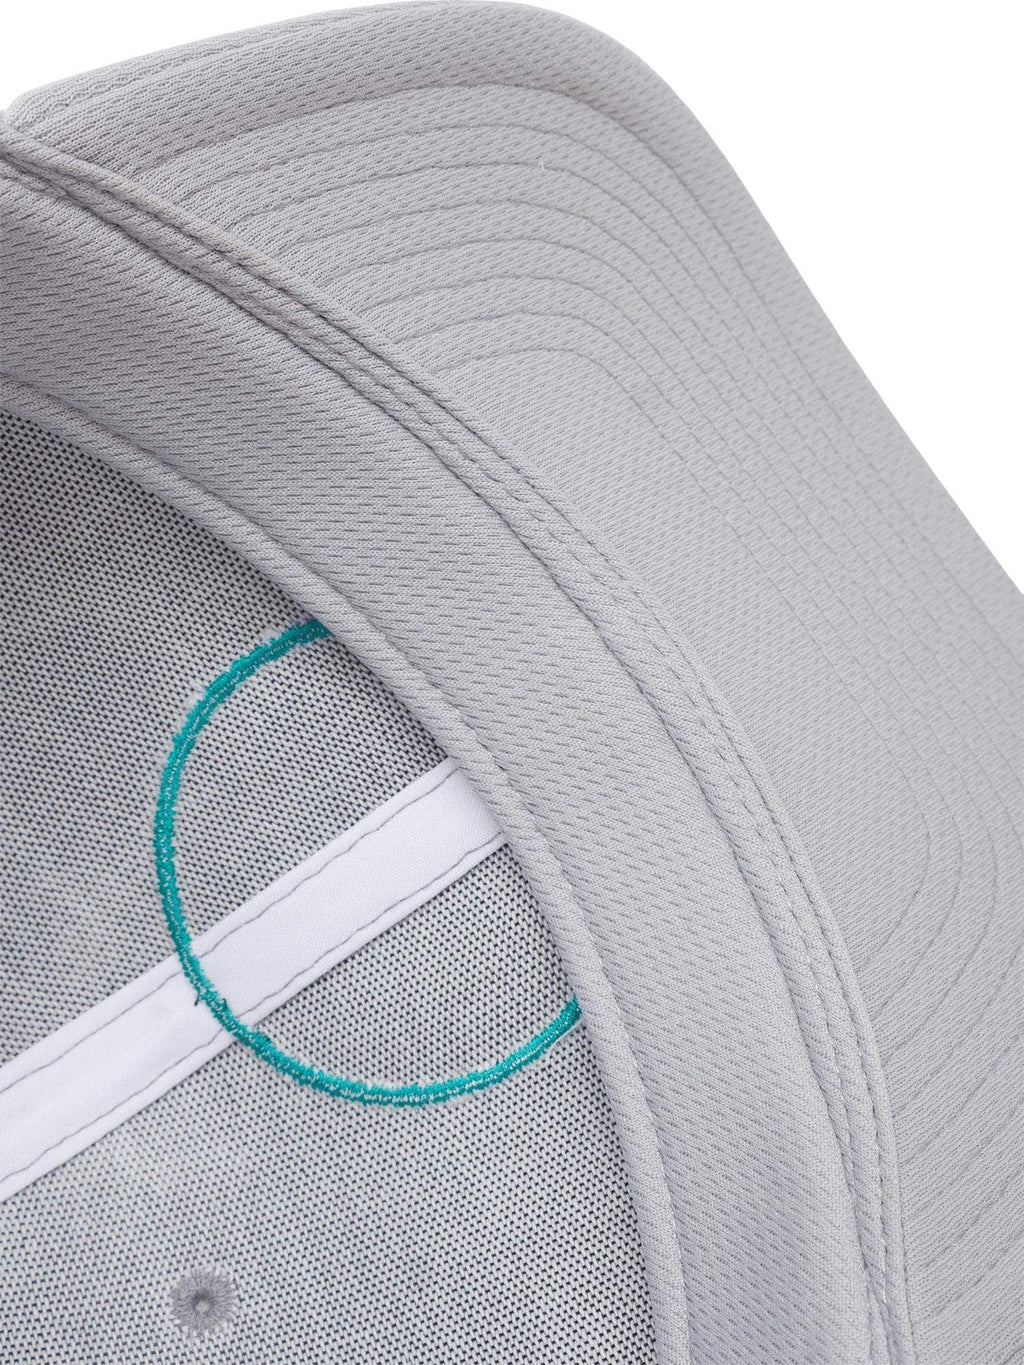 Close up view of the inside of a gray fabric hat, showing the closed hole mesh antimicrobial sweatband